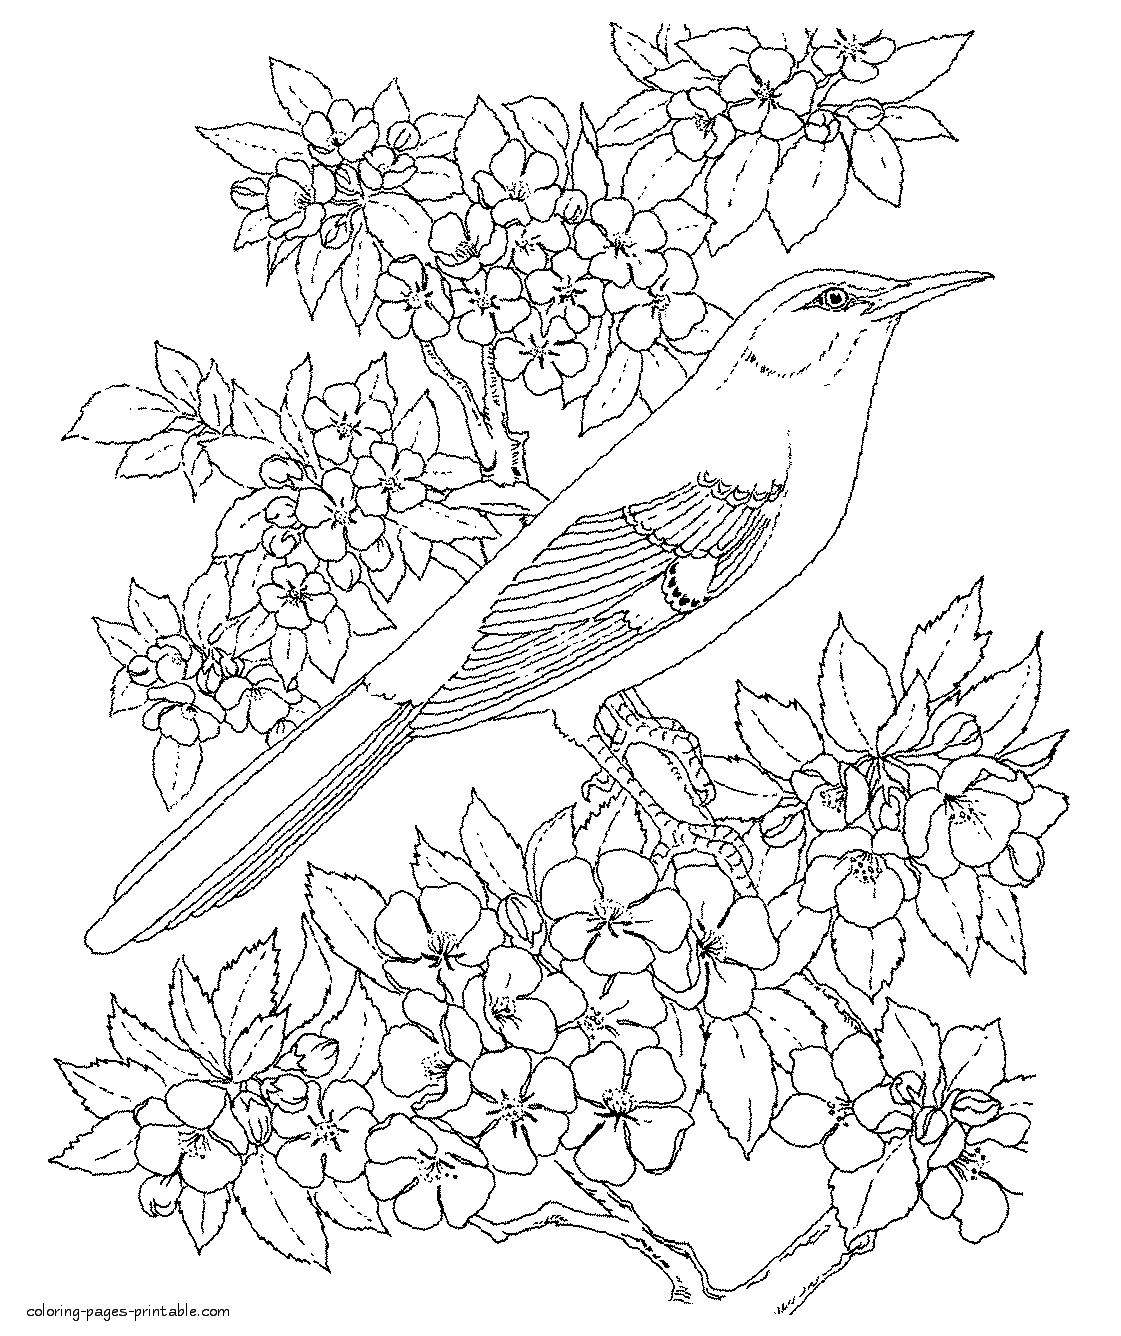 Bird Colouring Pages For Adults COLORING PAGES PRINTABLE COM